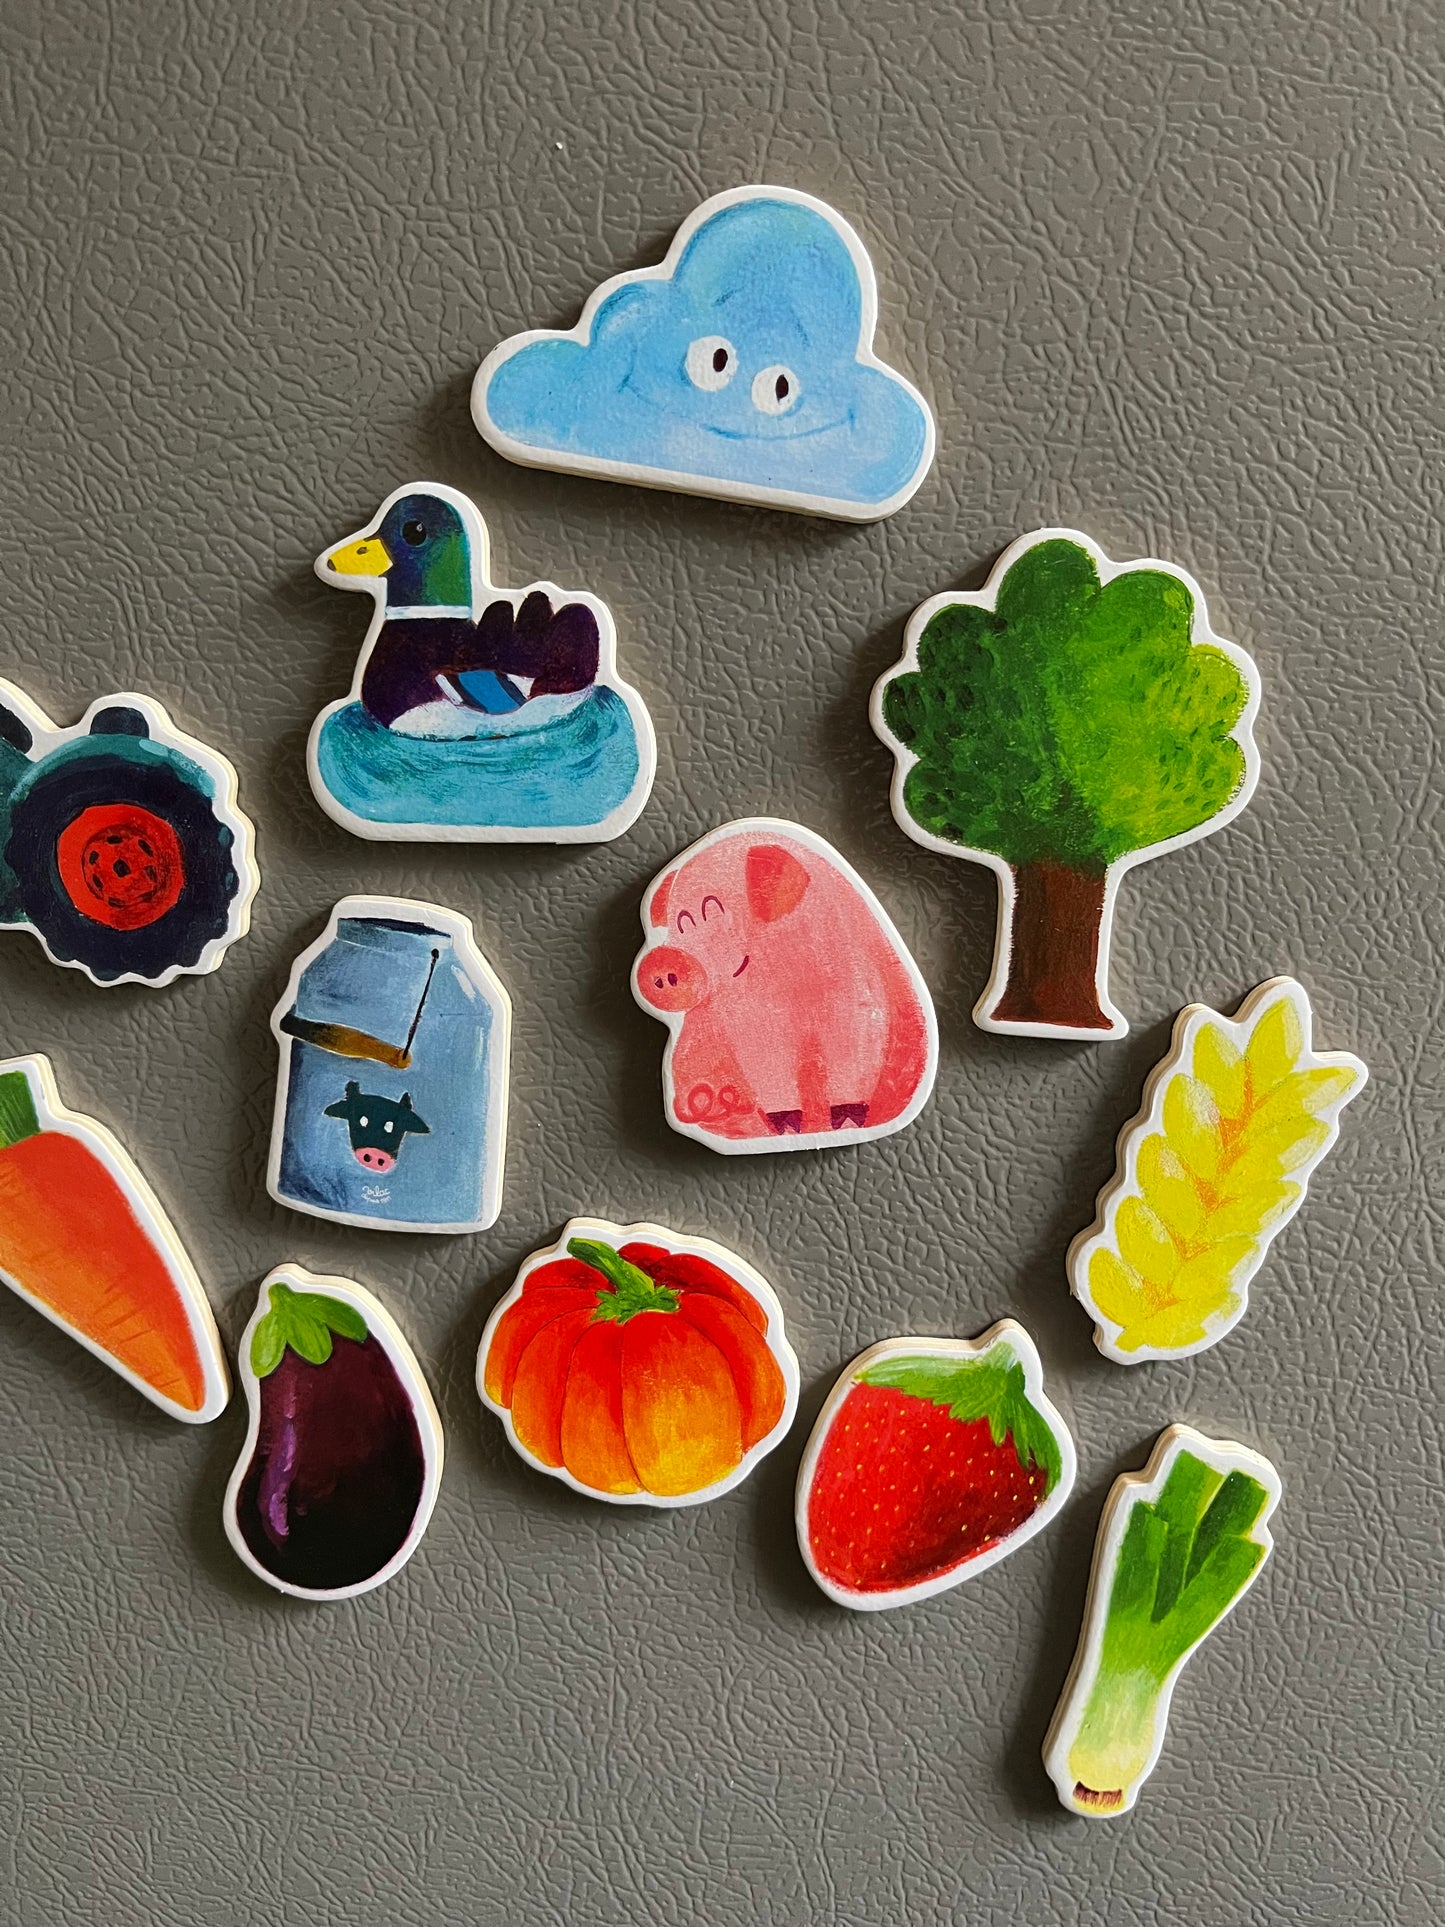 Acivity Set - Wooden MAGNETS, "On the Farm", 20 magnets!